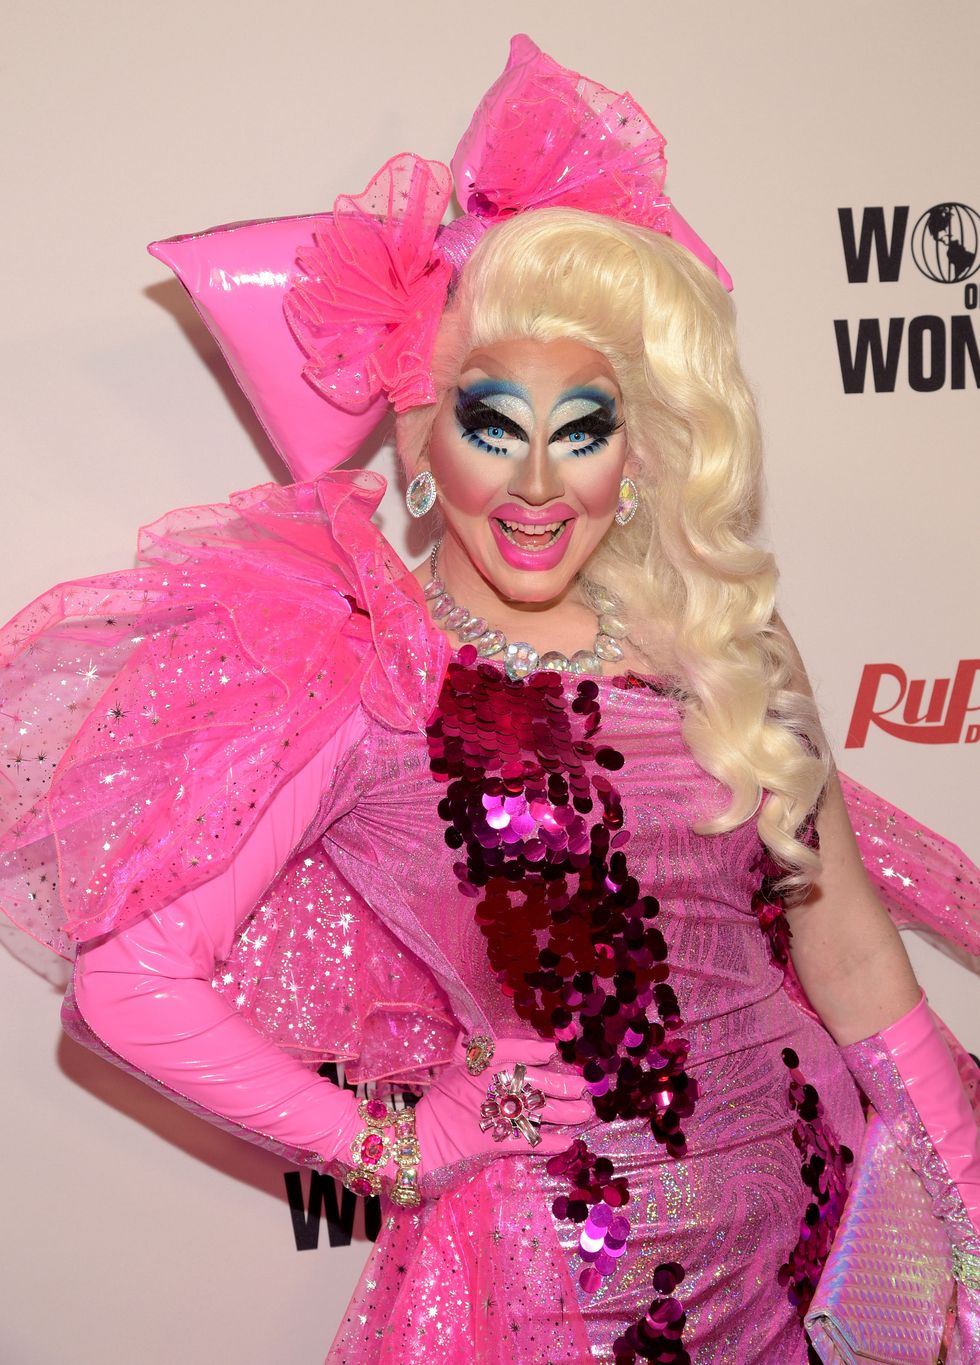 Trixie Mattel's 'Glow Up' Appearance Is an Iconic Moment Three